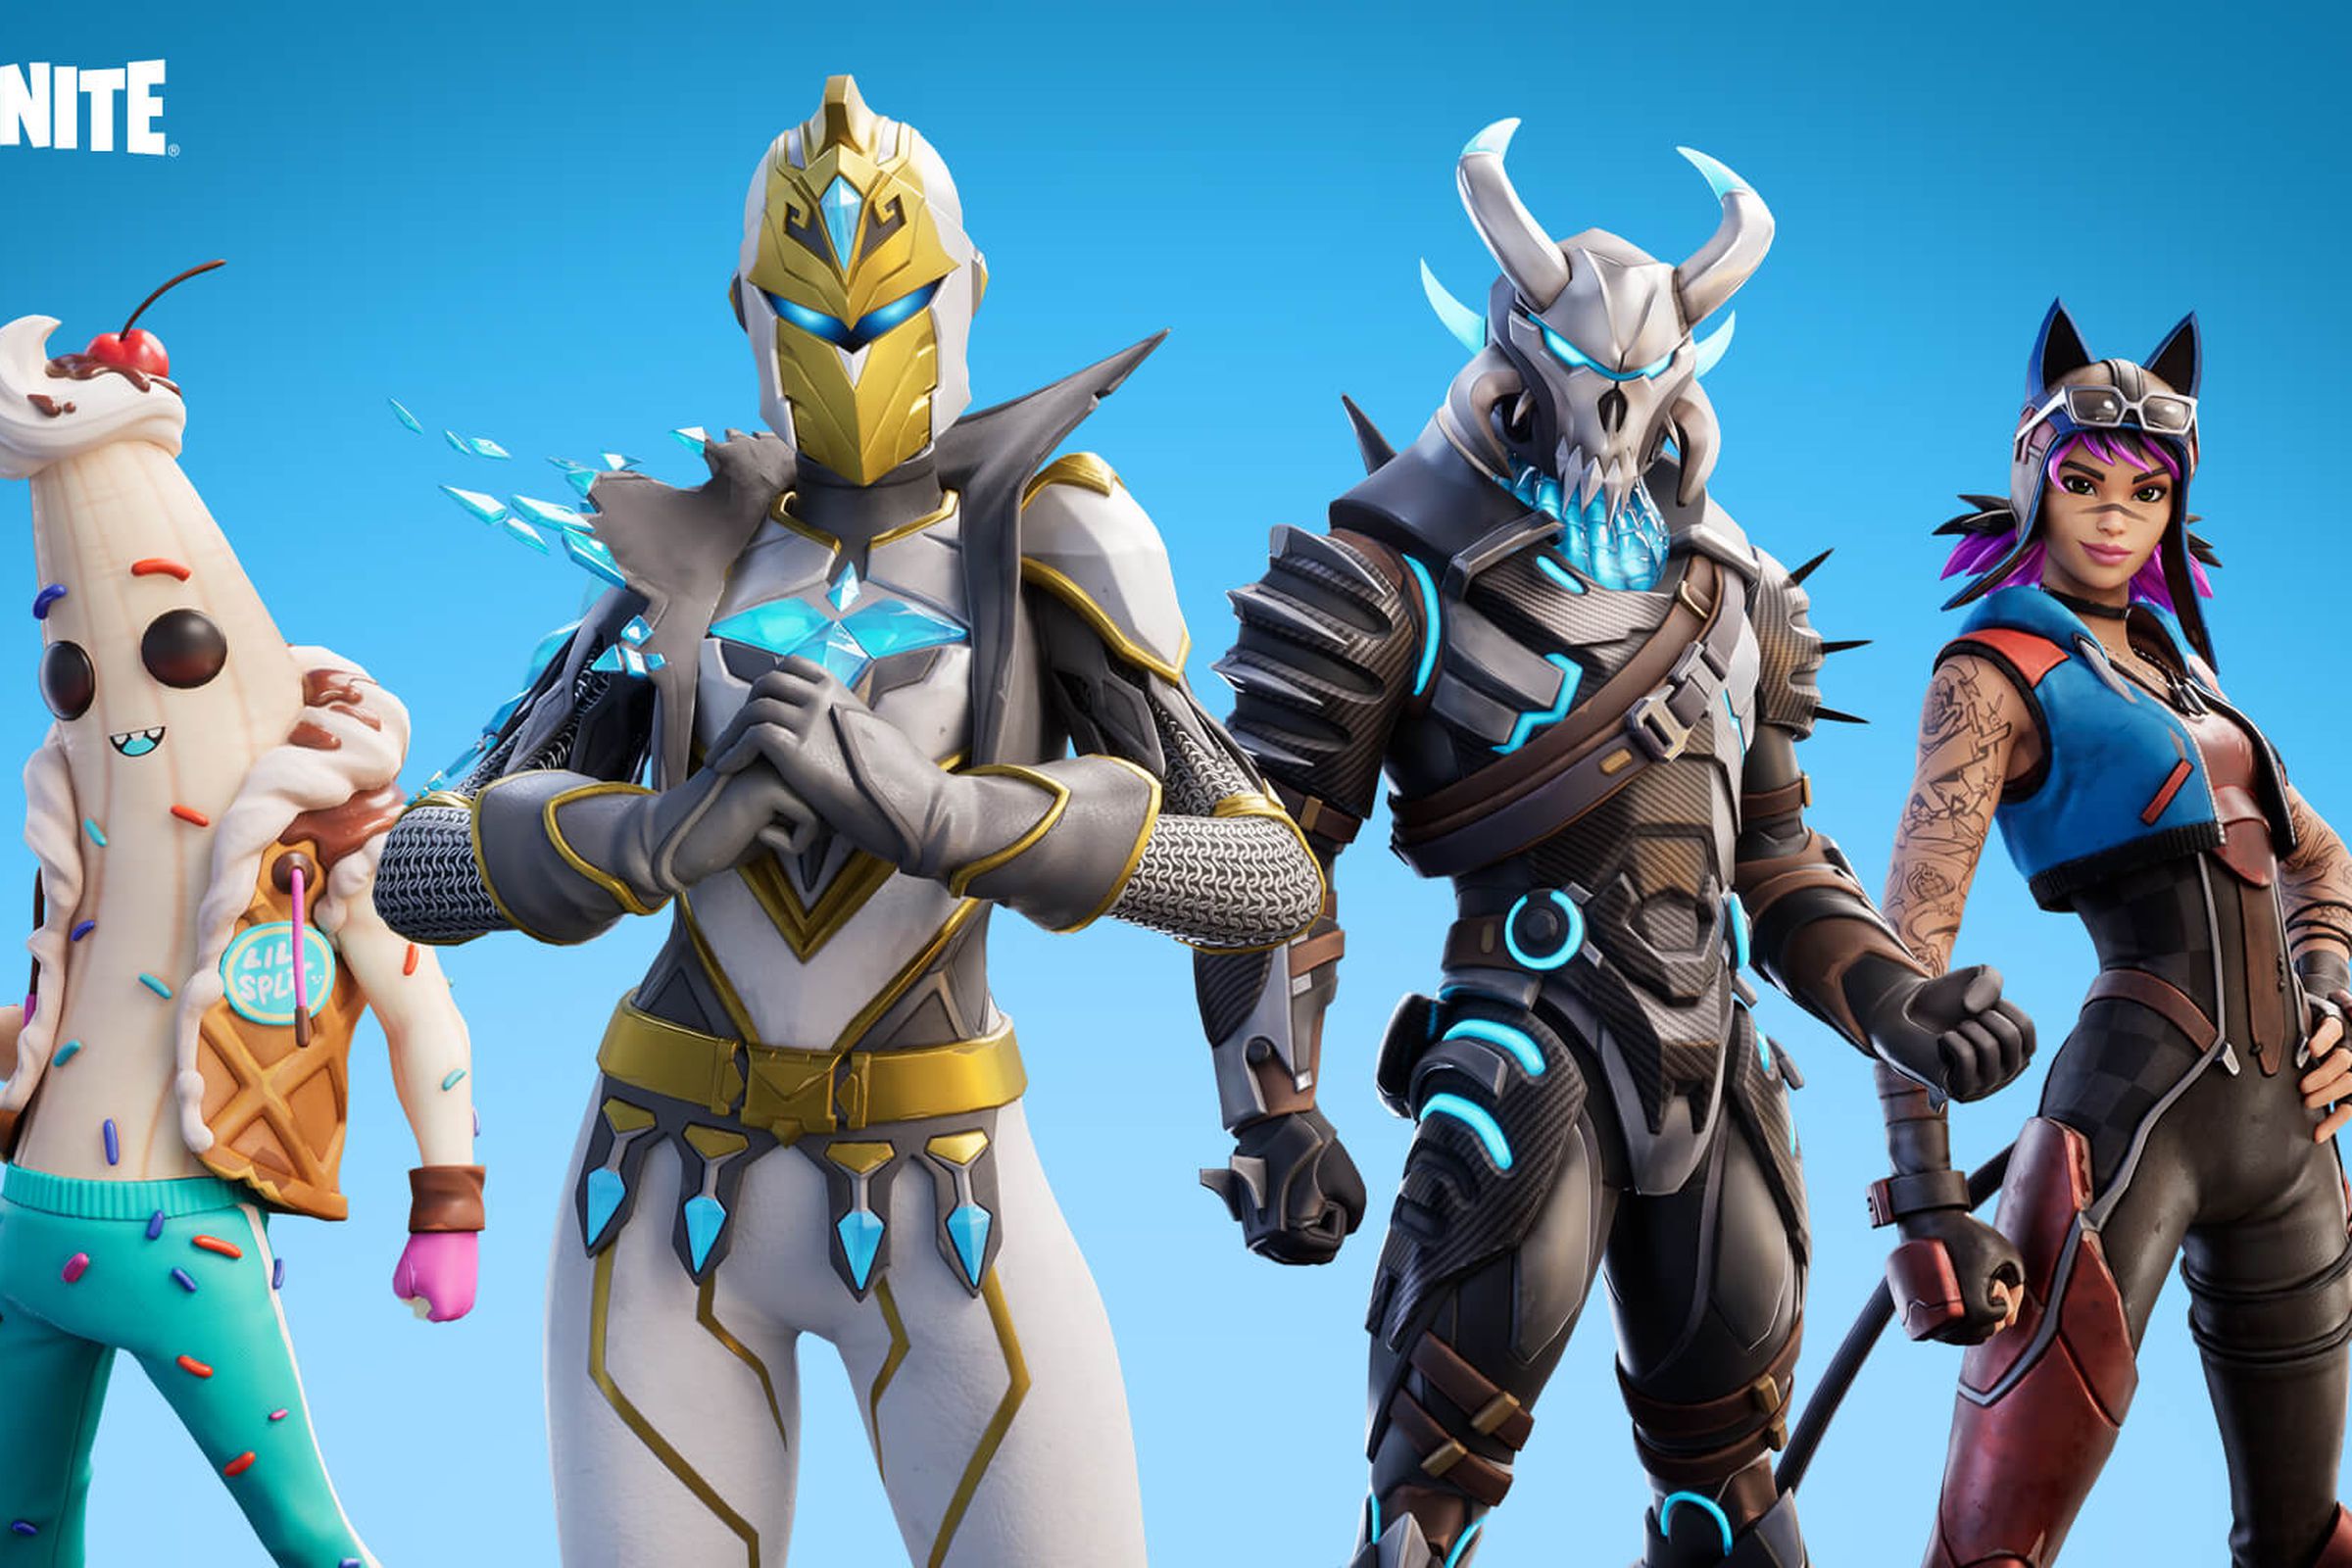 Four characters from Fortnite.